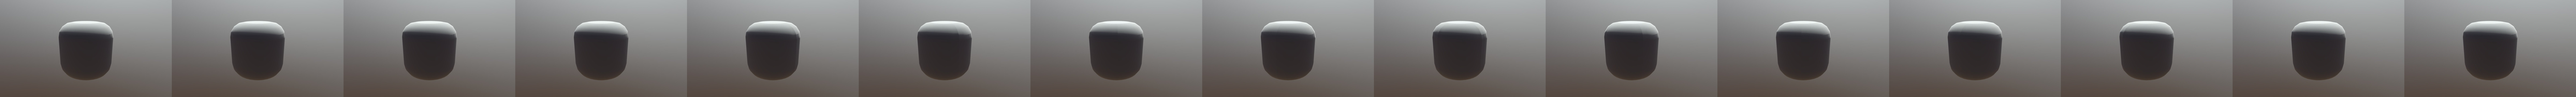 Roblox Head For Blender Download Free 3d Model By Sdfgh13s Sdfgh13s Fd06103 - how to add a blender model into roblox